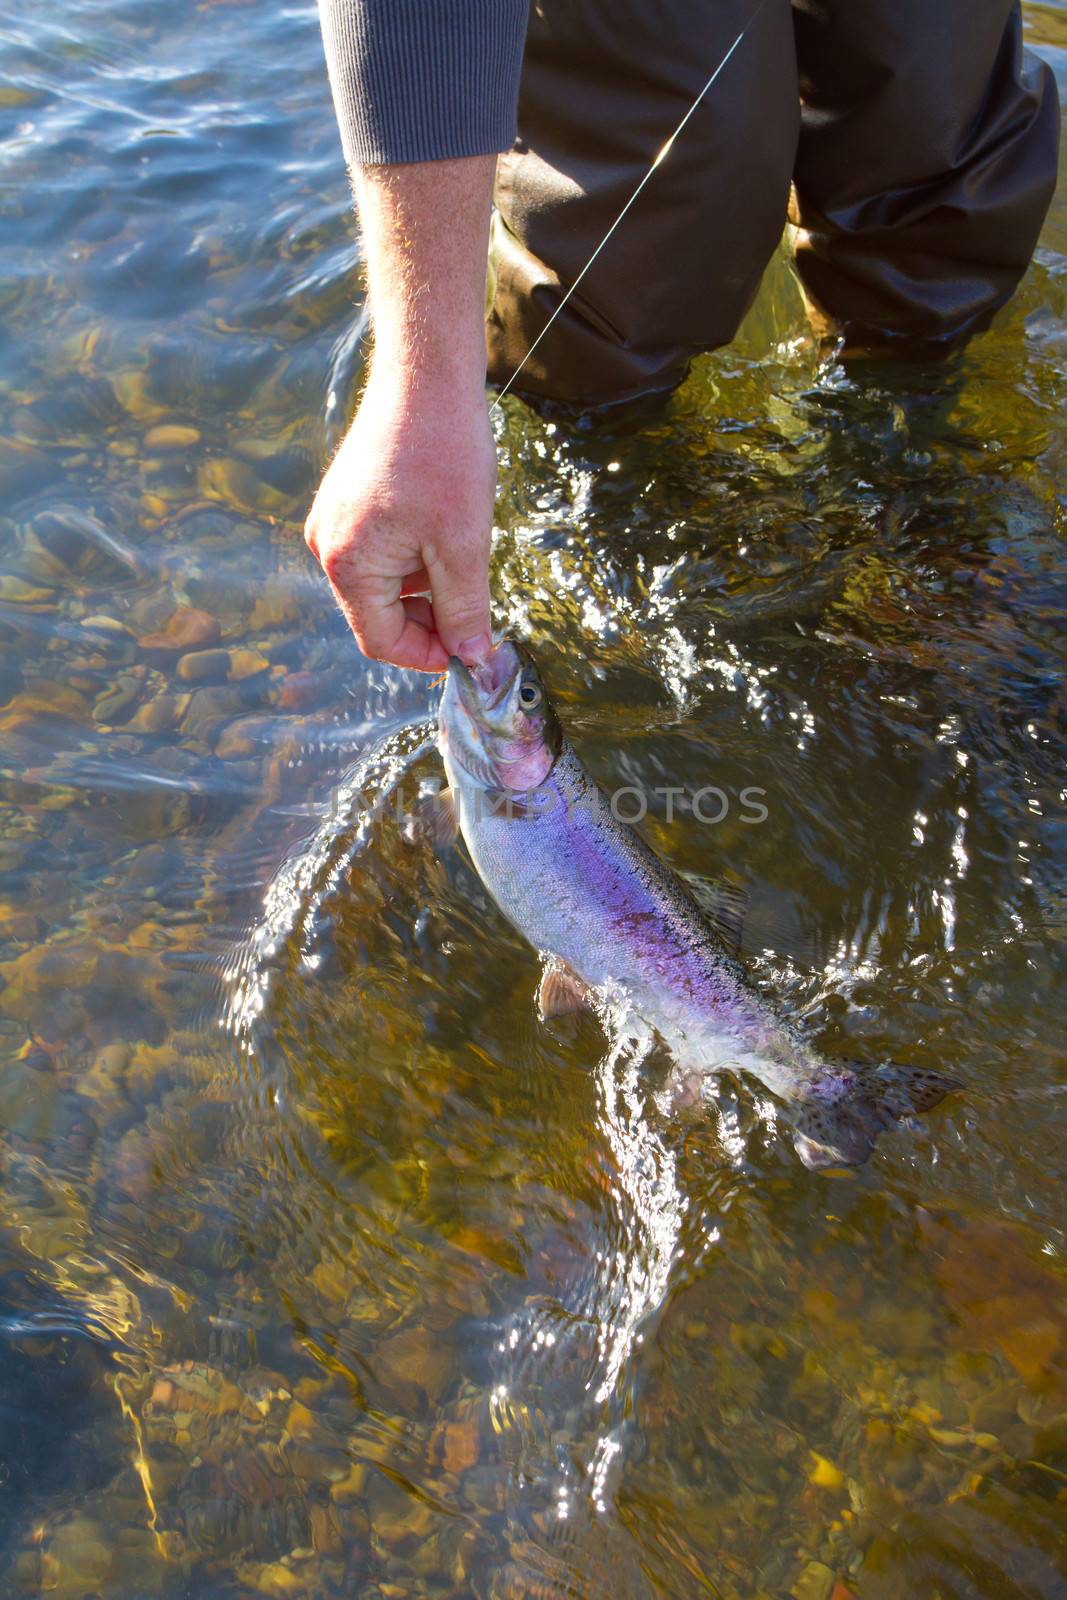 Catch and release fishing is a great sustainable way to enjoy angling yet leaving fish like this native rainbow trout redside for years to come.